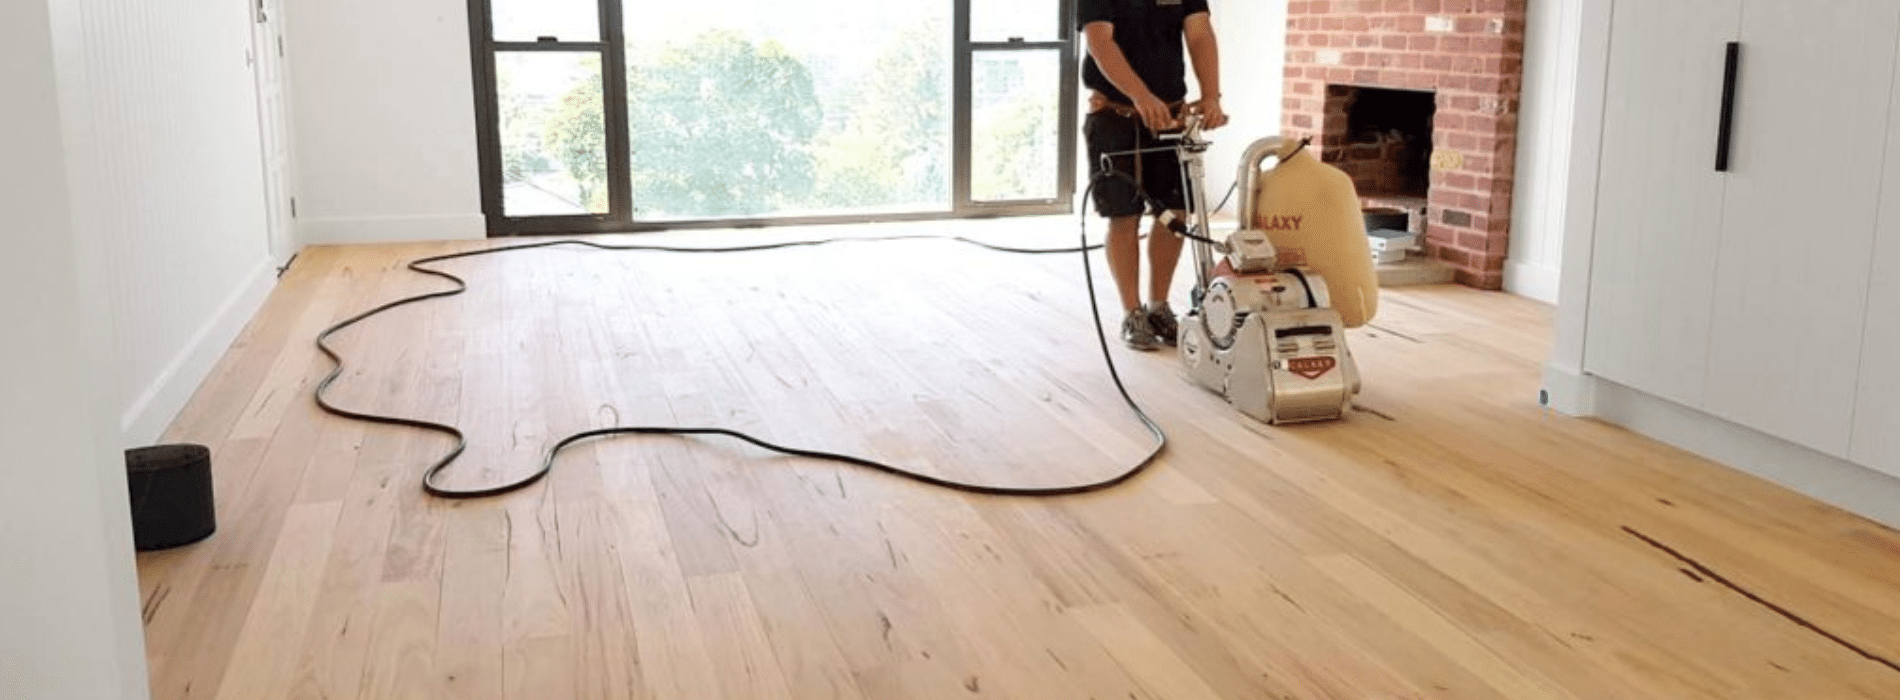 Herringbone Floor Sanding: Mr Sander® using the powerful Effect 2200 belt sander for precision. Voltage: 220V, Frequency: 50-30Hz. Witness the clean and efficient results on a 200x700 mm herringbone floor with the HEPA-filtered dust extraction system.